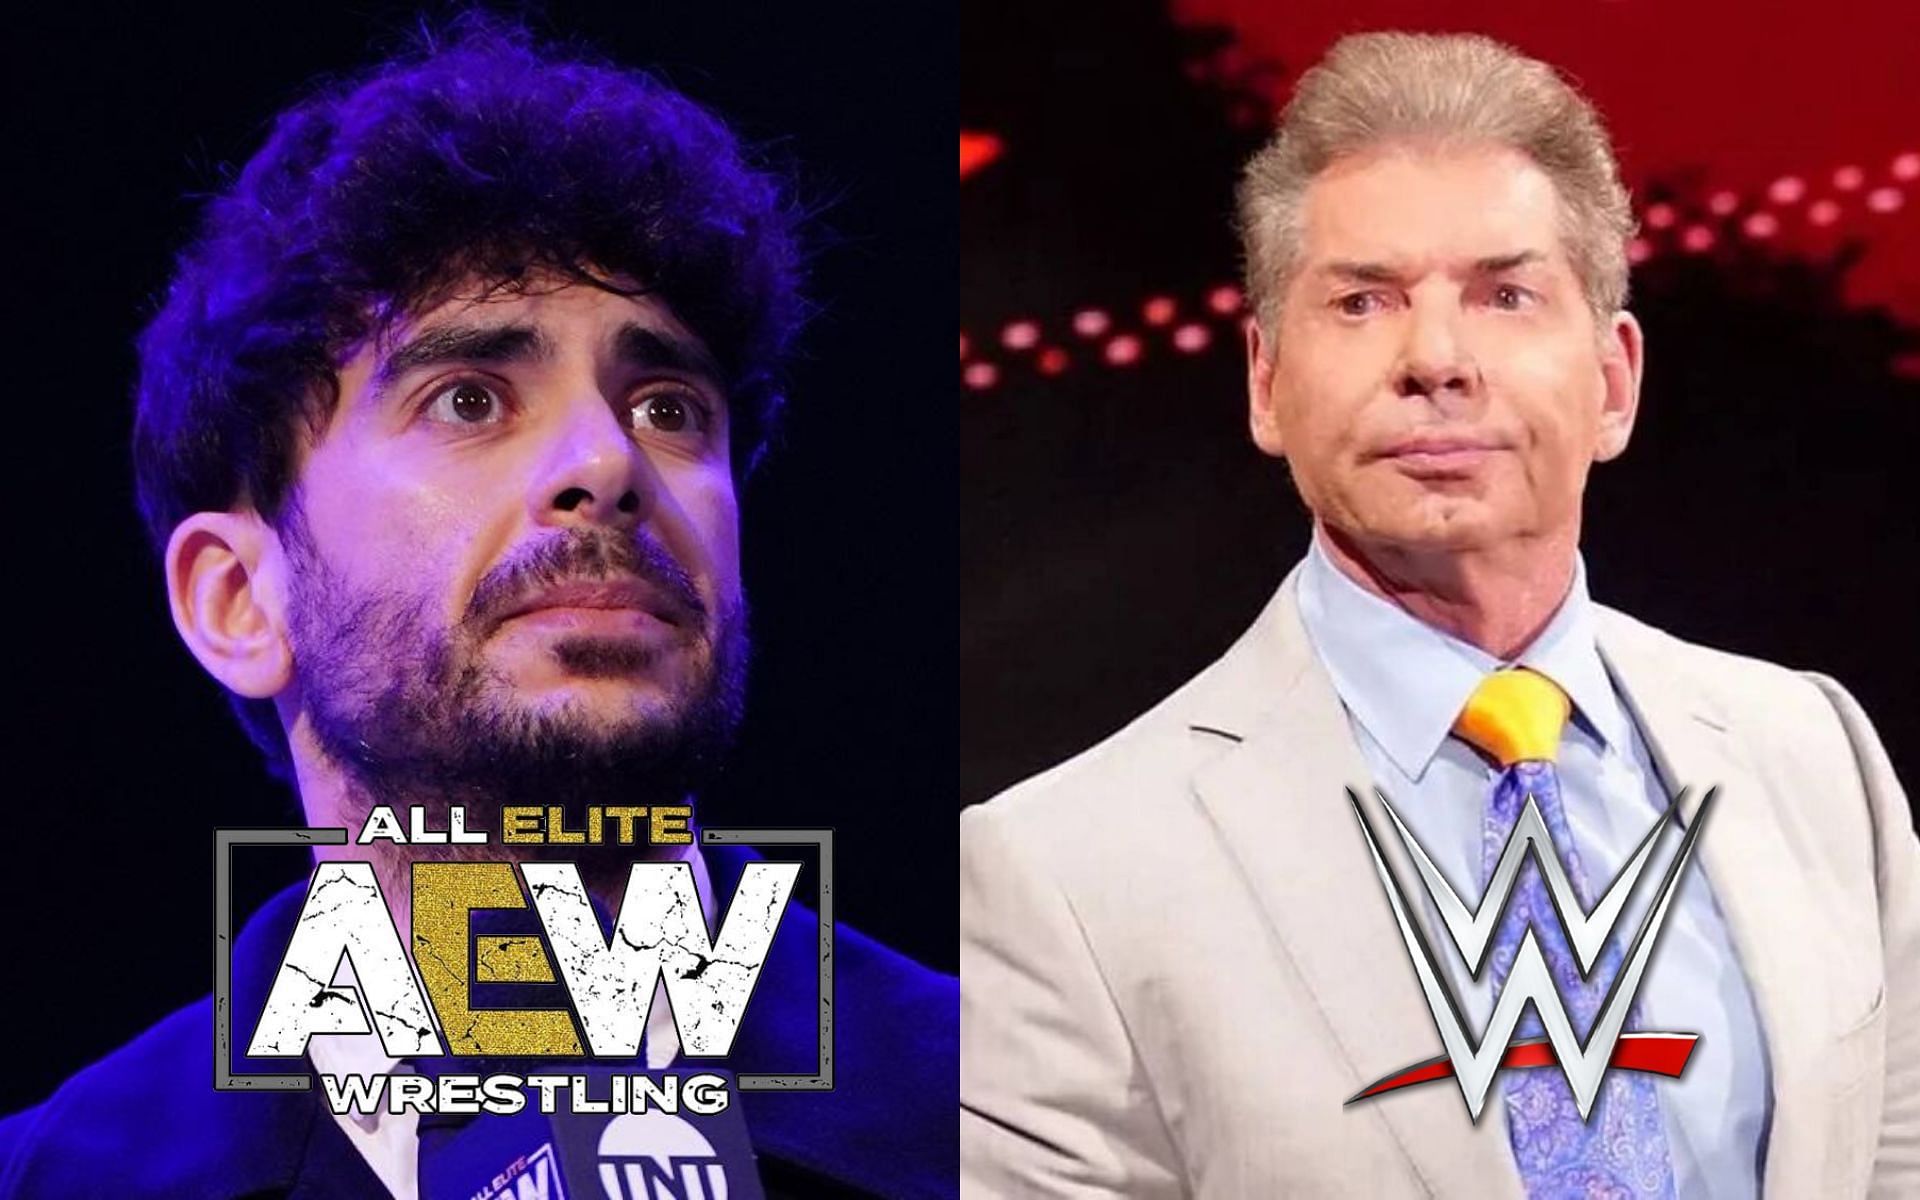 AEW President Tony Khan (left) and former WWE Chairman Vince McMahon (right).